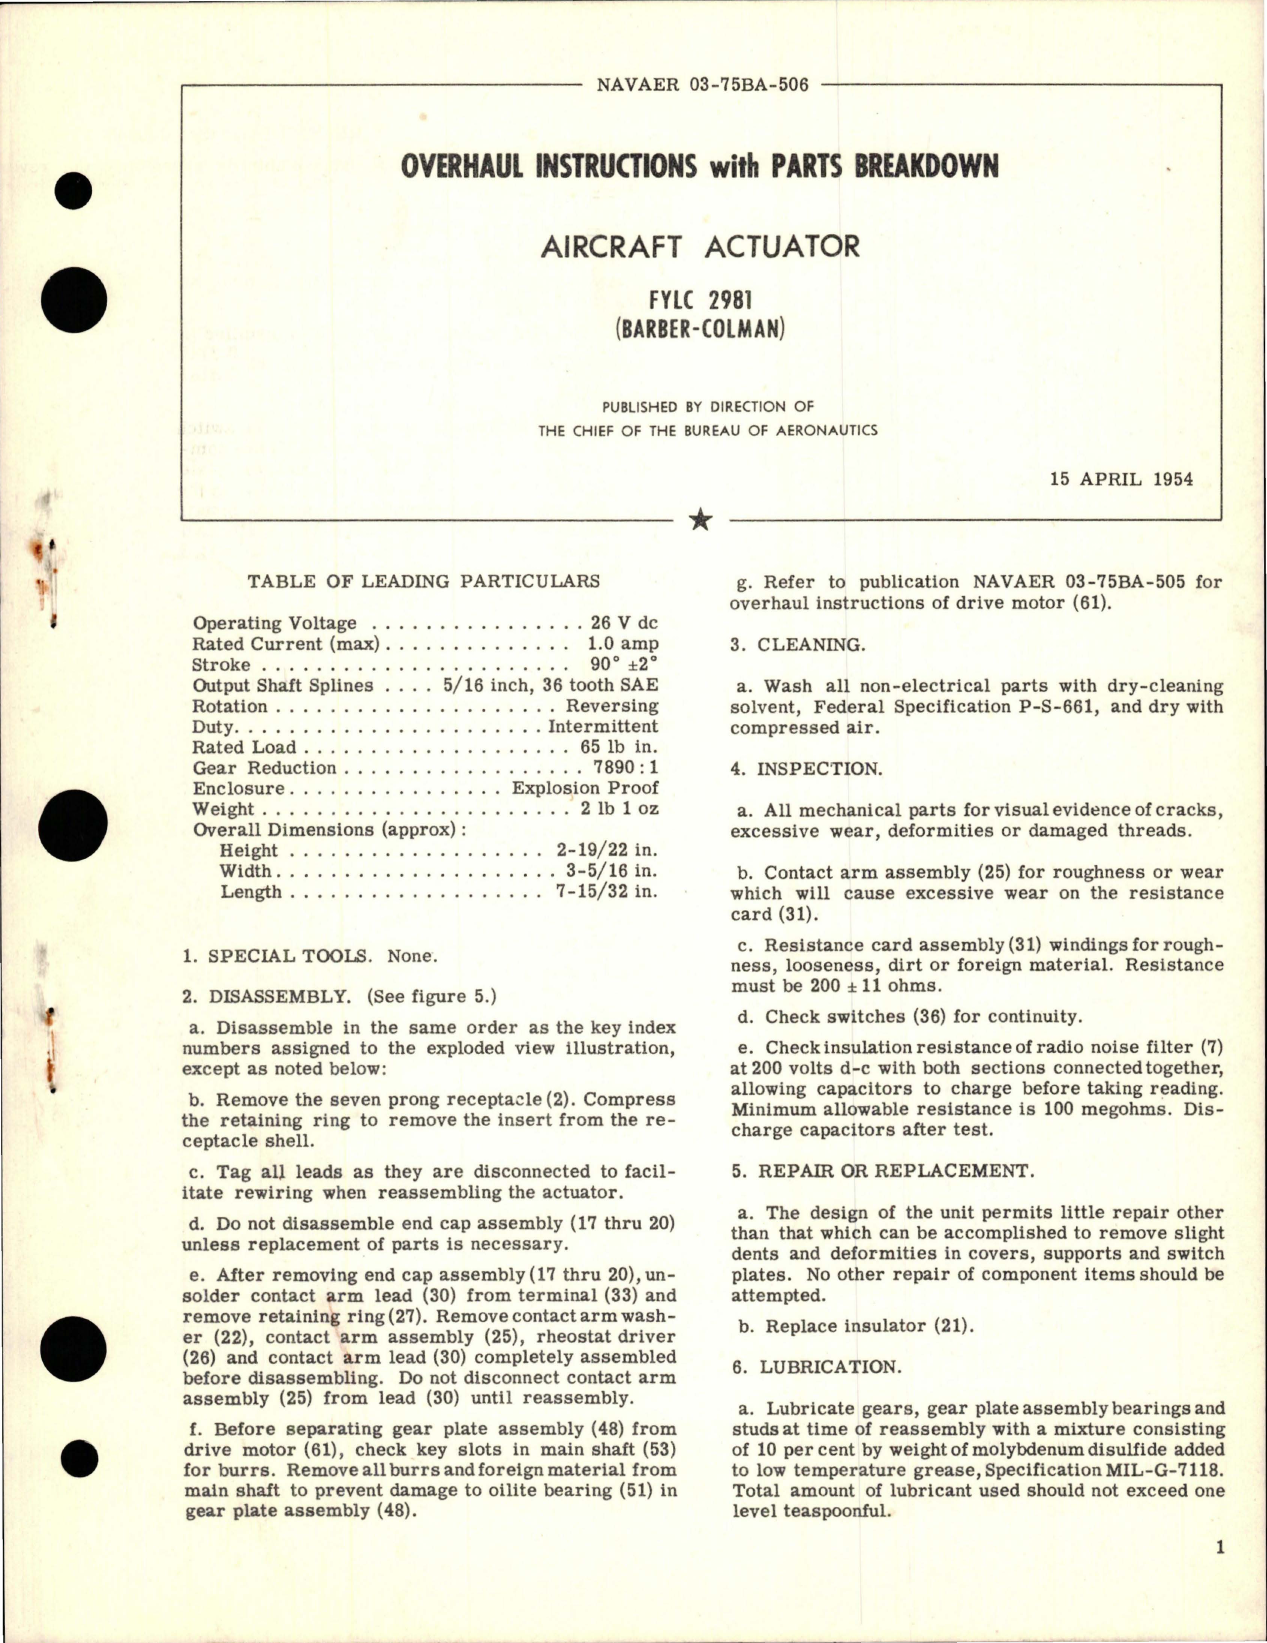 Sample page 1 from AirCorps Library document: Overhaul Instructions with Parts Breakdown for Aircraft Actuator - FYLC 2981